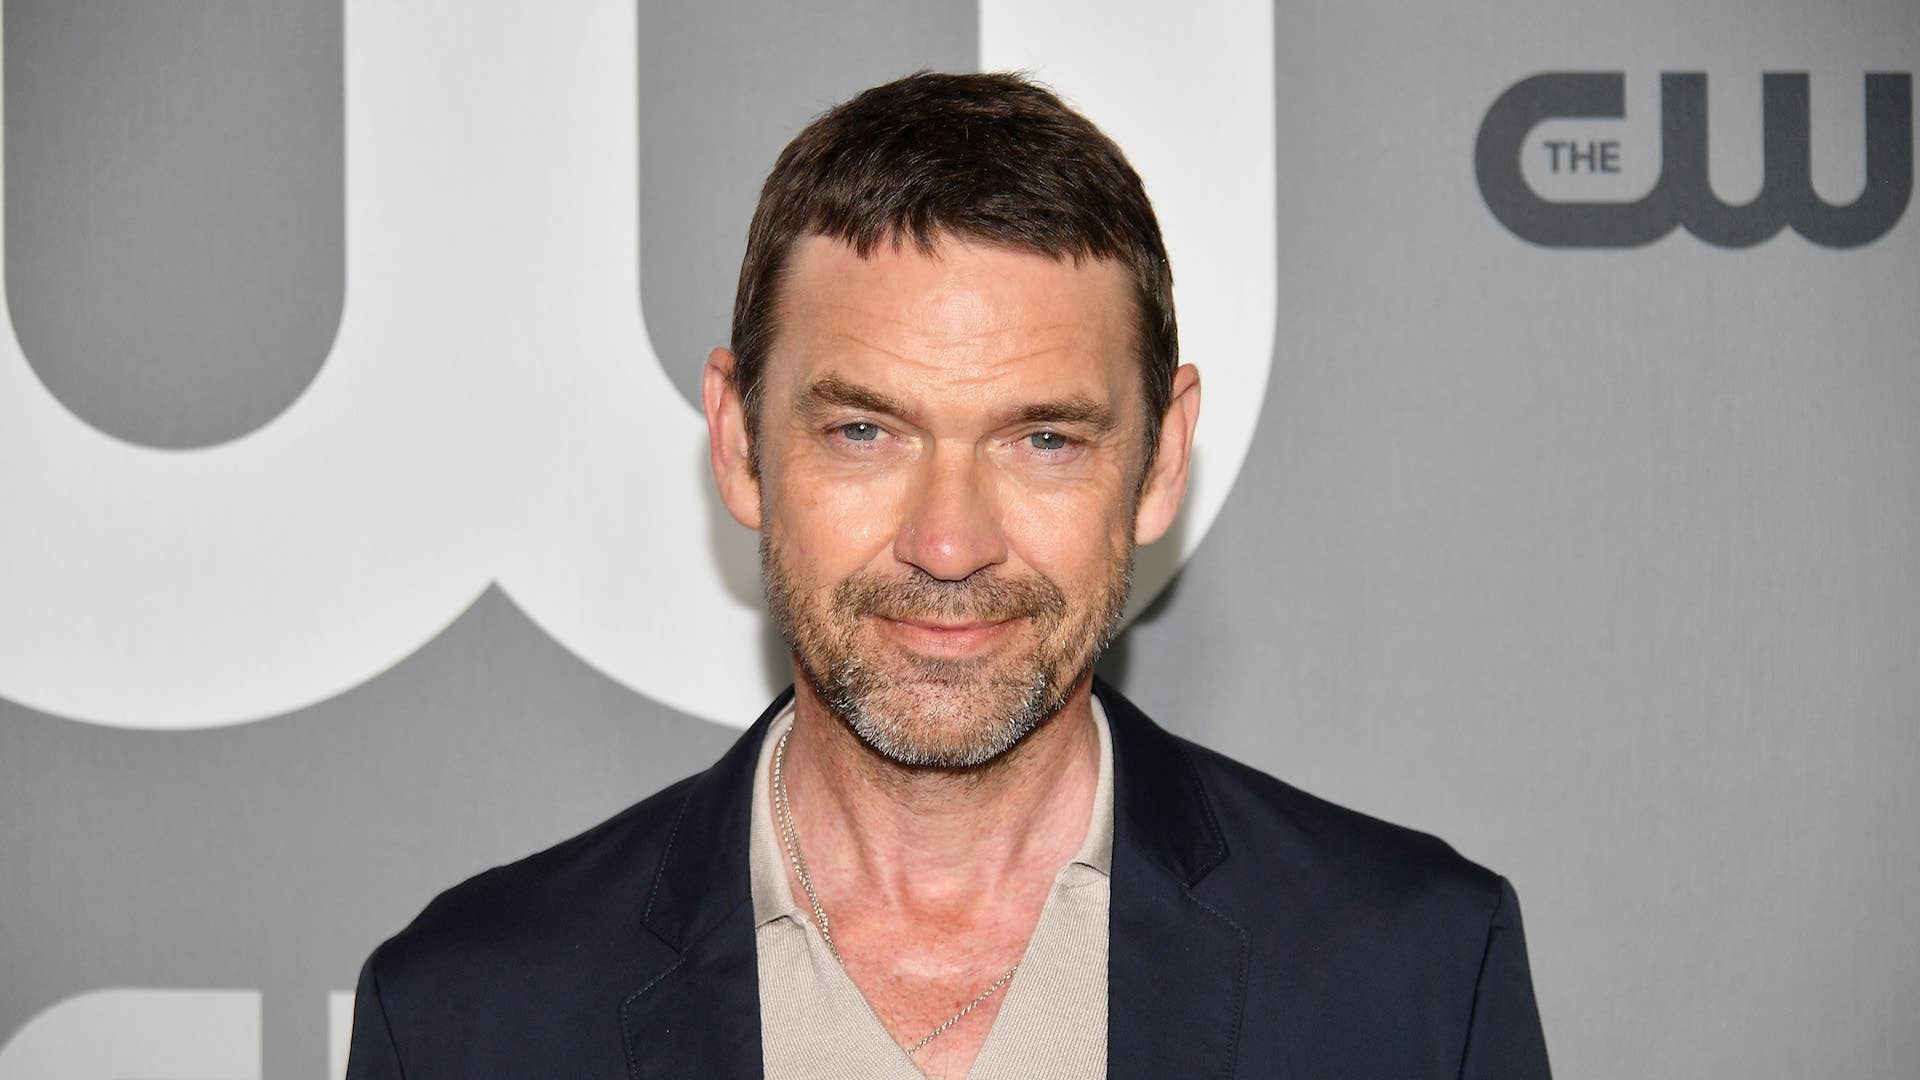 Dougray Scott attends the 2019 CW Network Upfront.